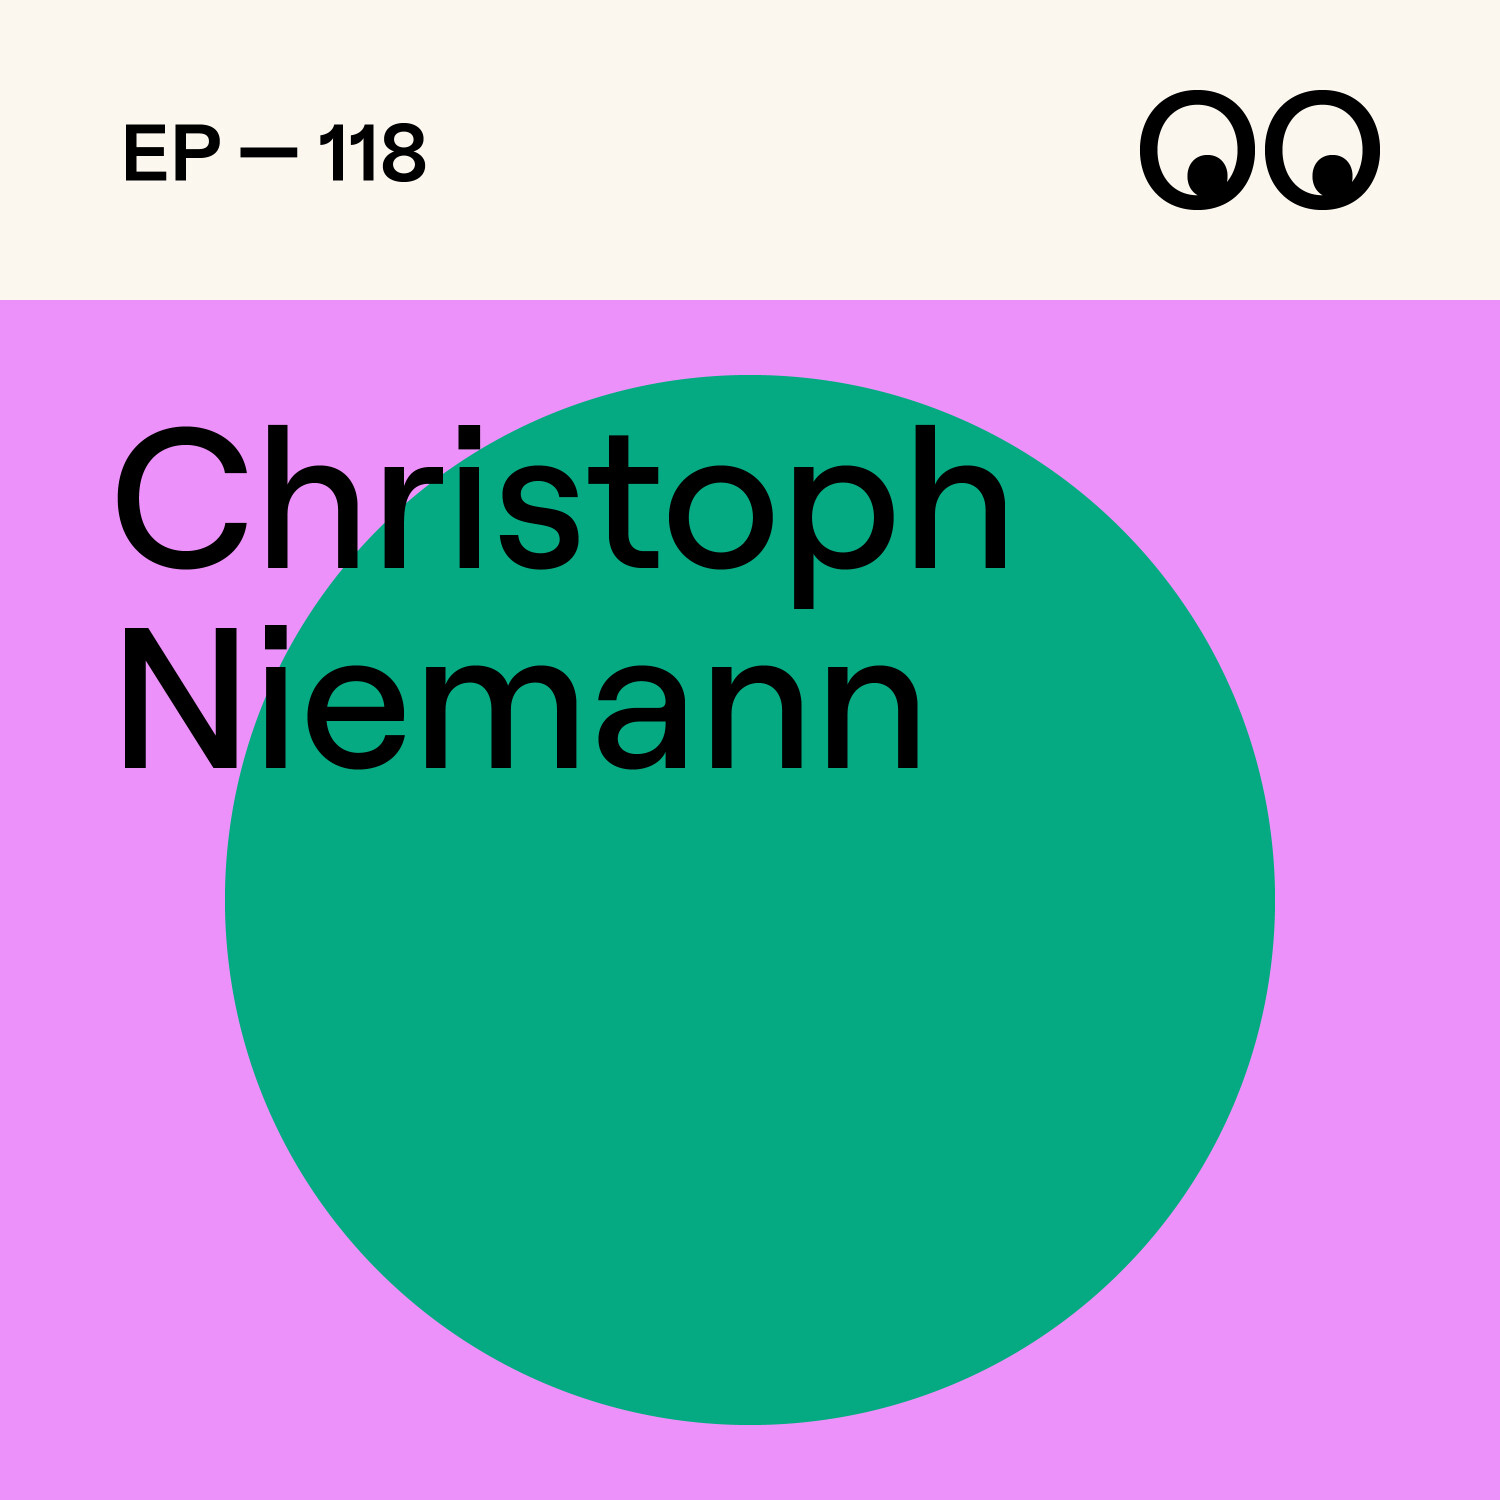 Lines & Legacy: Exploring the creative process amidst industry shifts, with Christoph Niemann